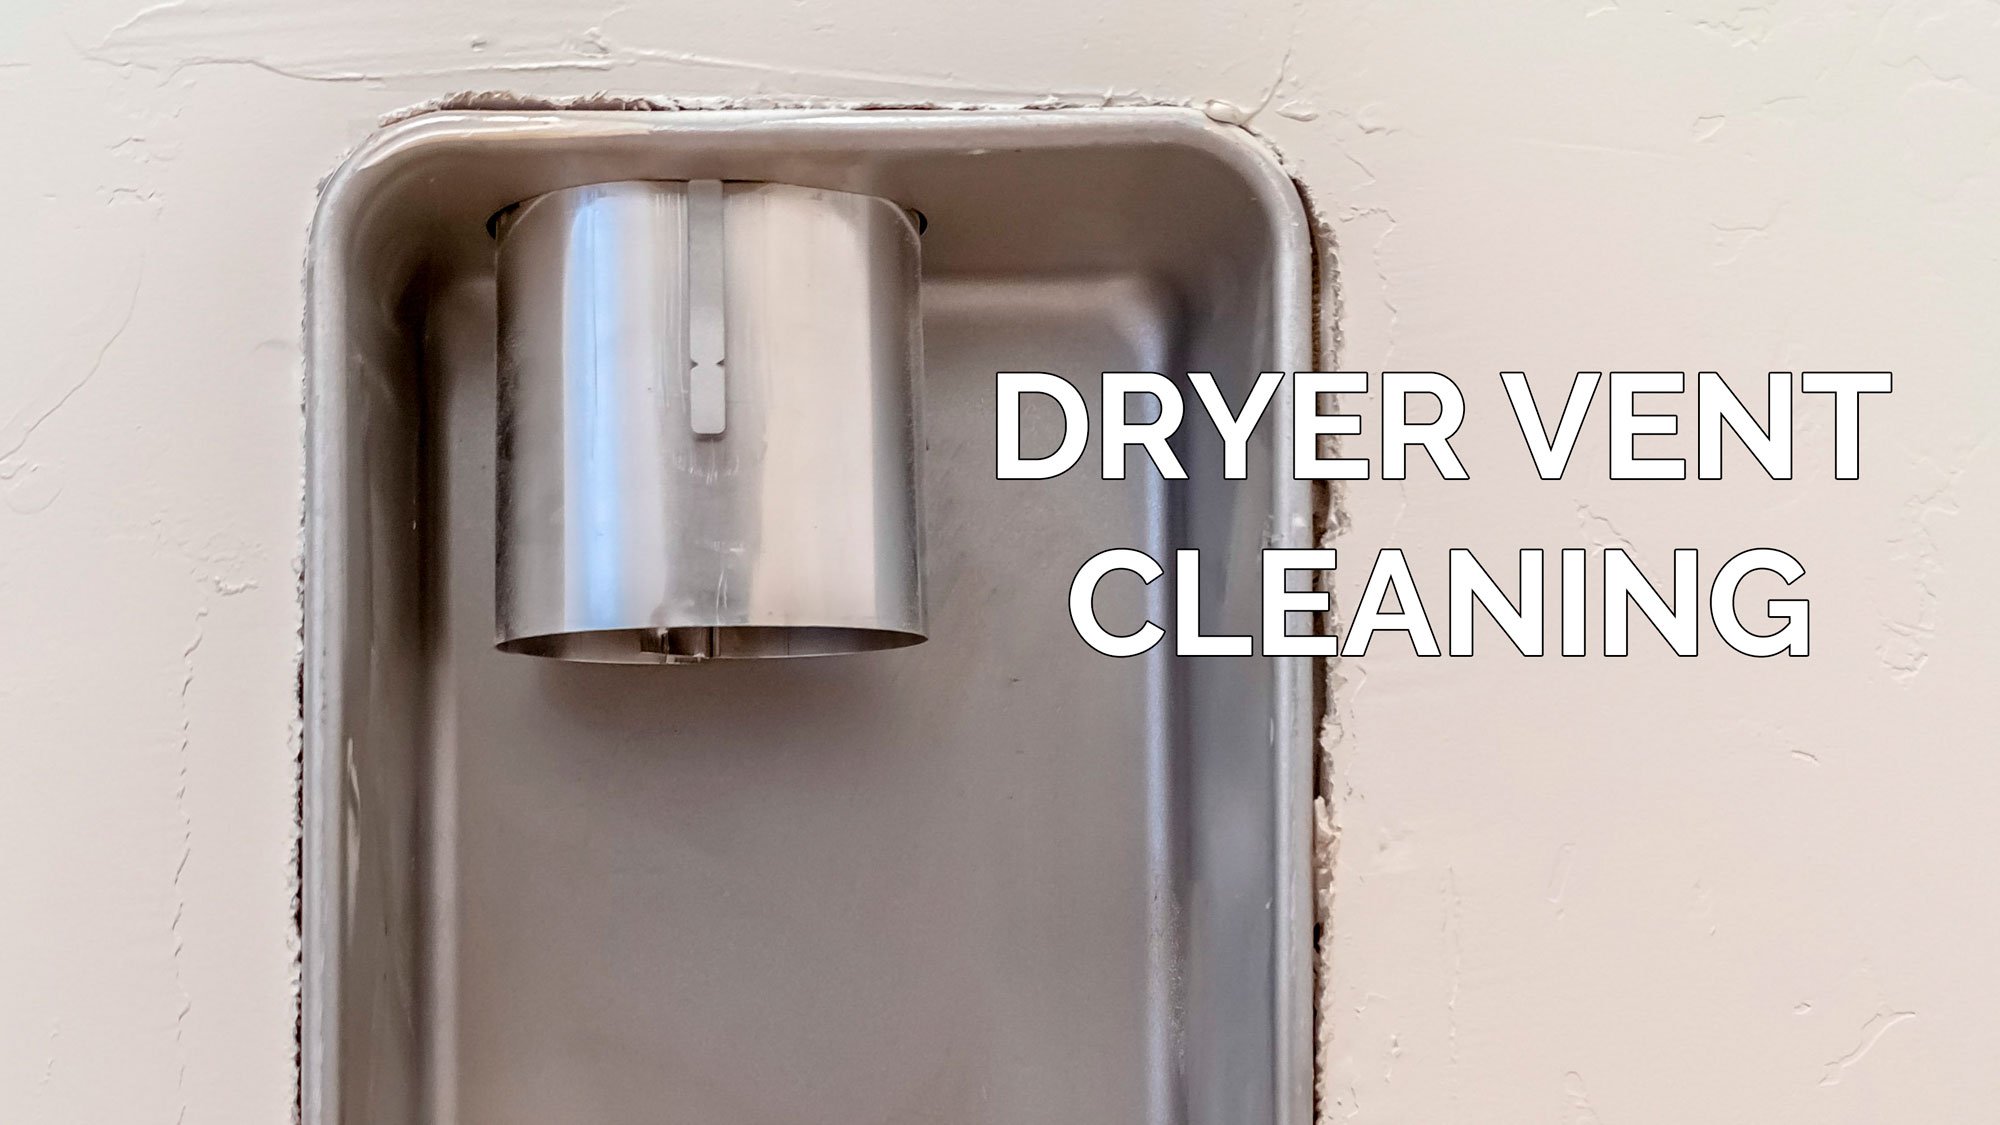 Dryer Vent Recommended Maintenance Intervals